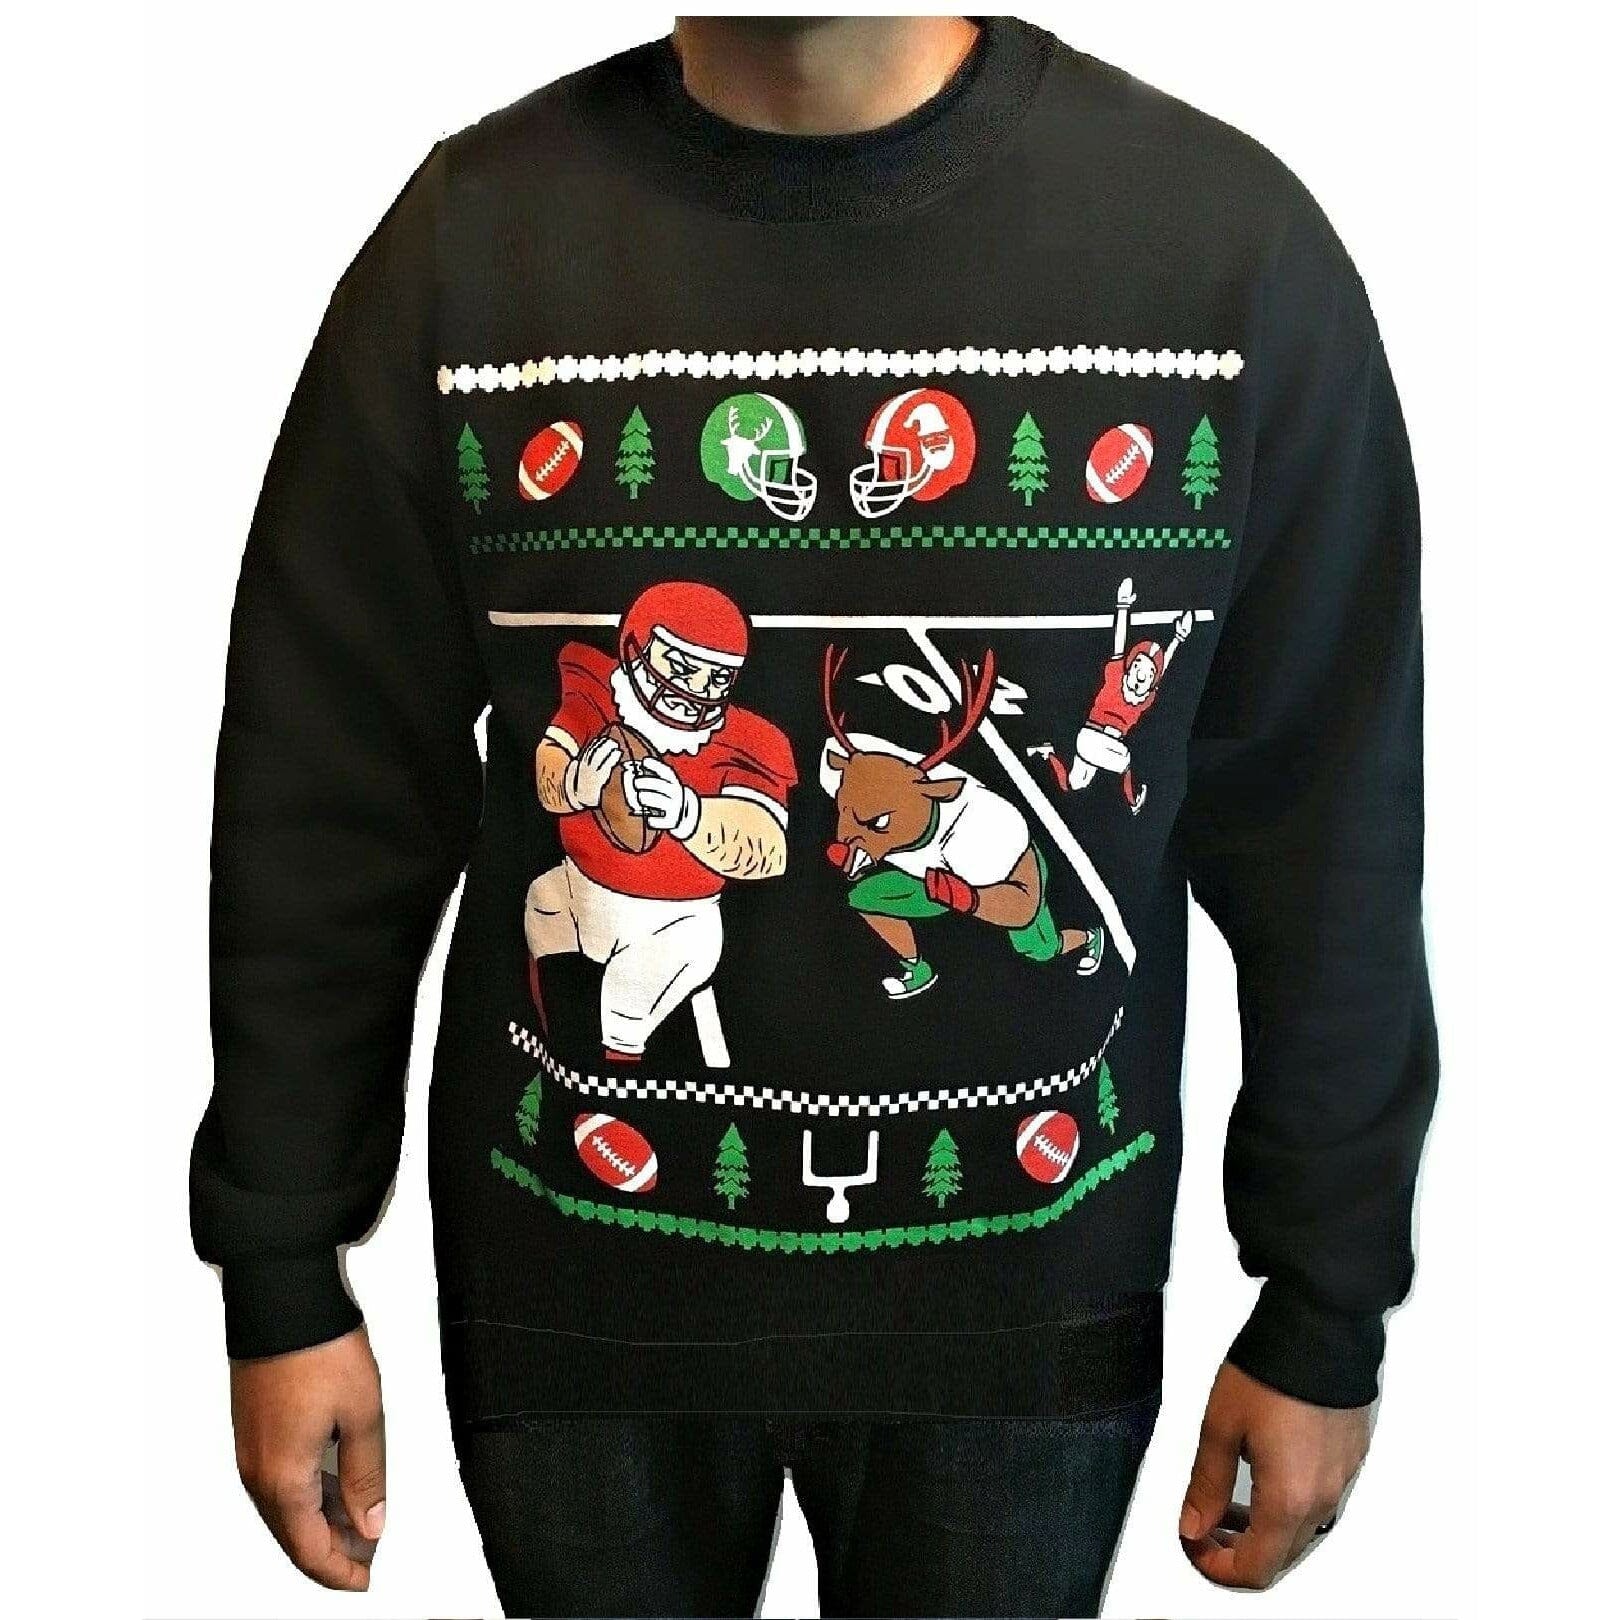 FOOTBALL - Black "Ugly" Christmas Sweaters Snowtorious 